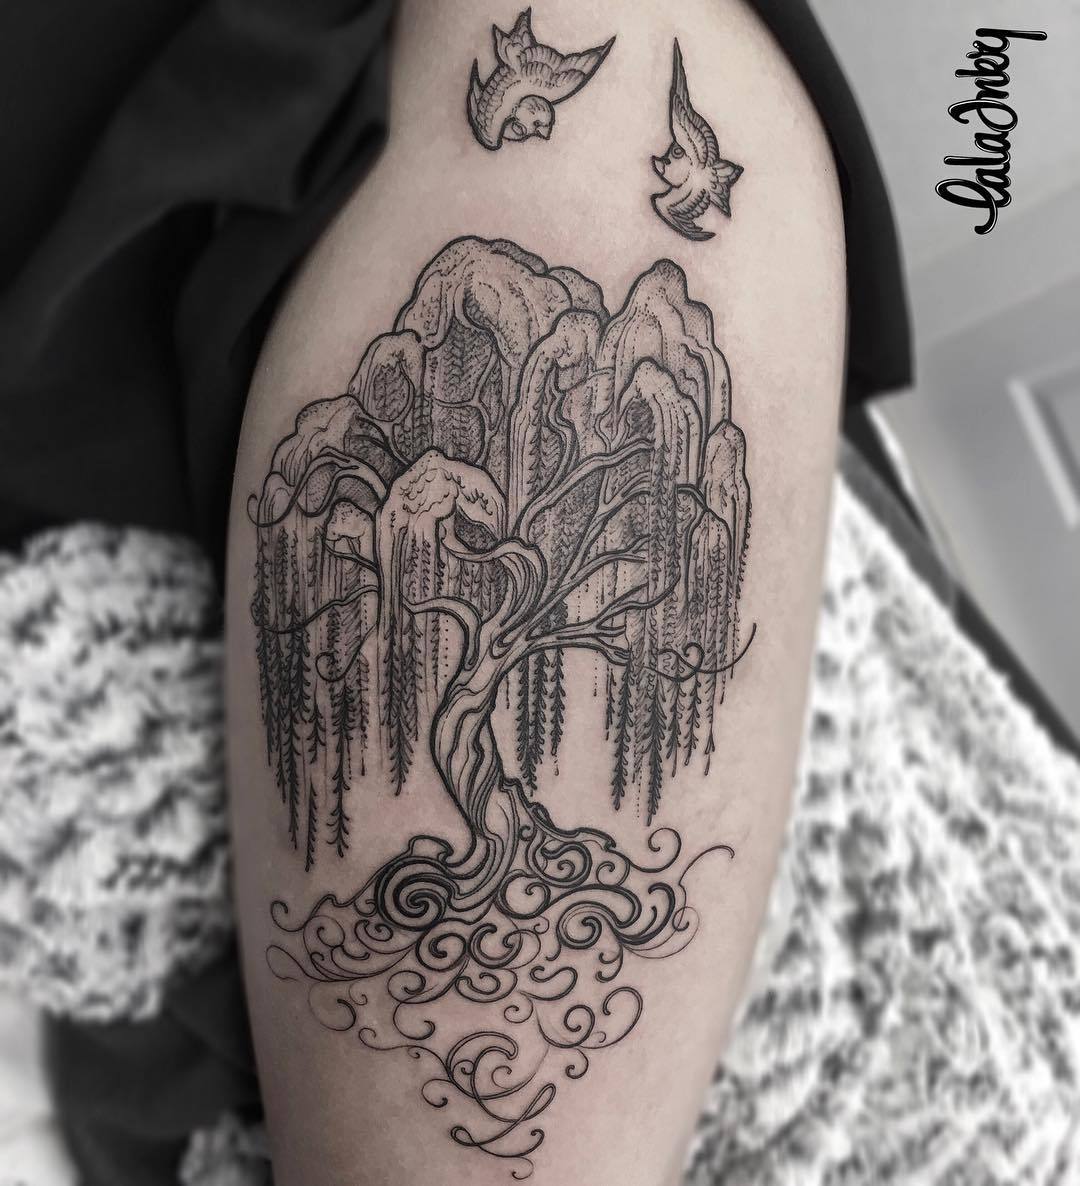 Weeping Willow Goddess Tree of Life by Dr Z Laughing Hyena Tattoo  Washington DC  rtattoos